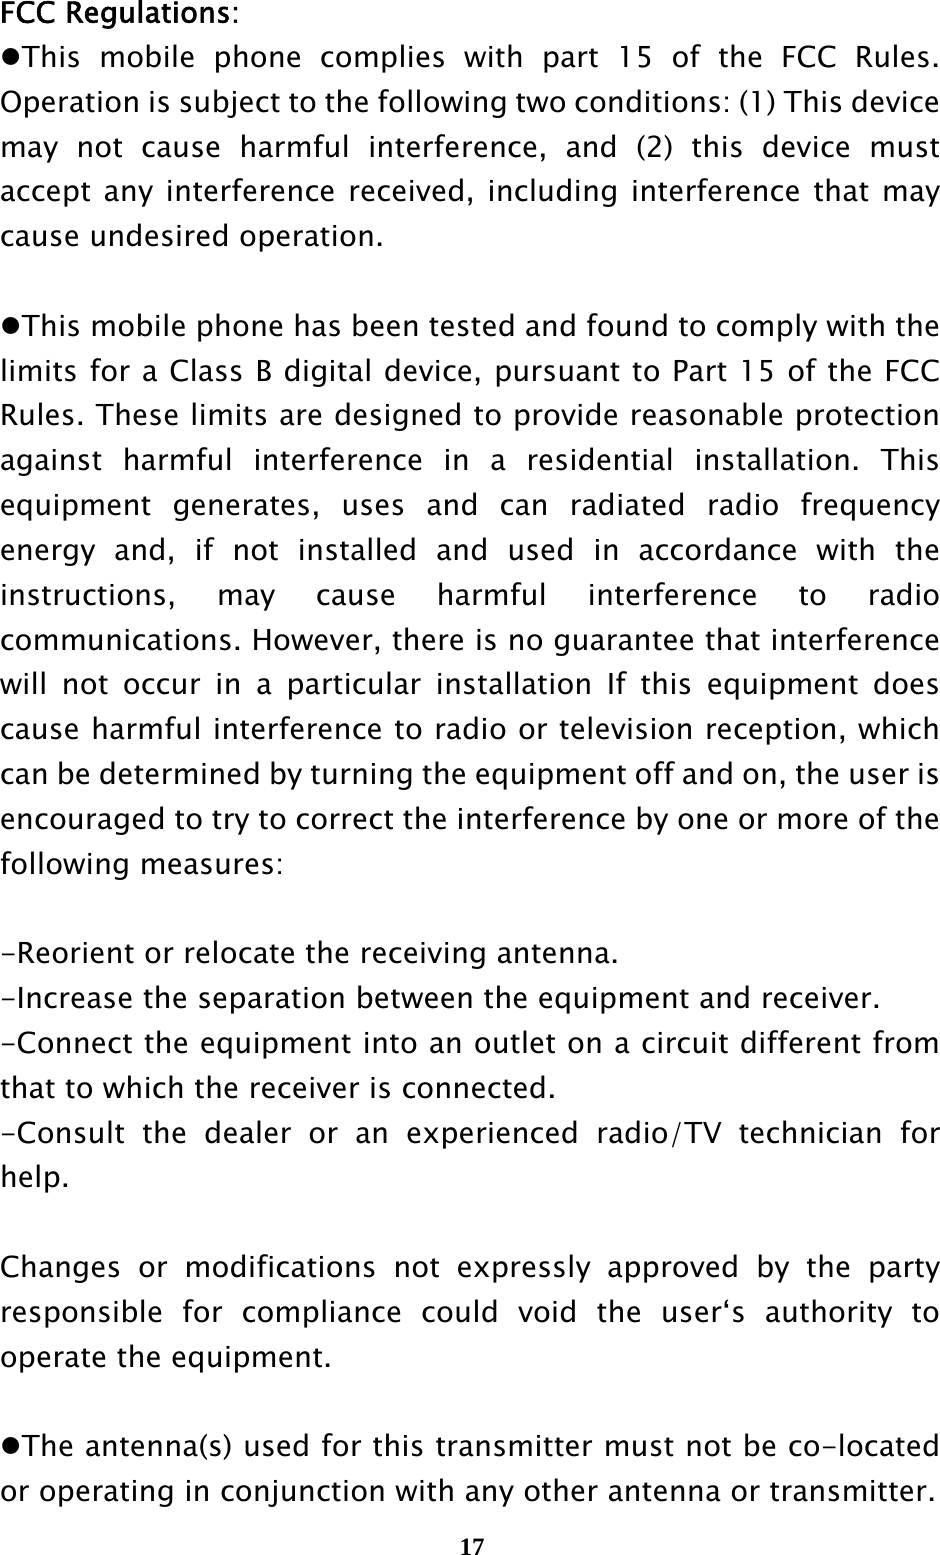  17FCC Regulations: This mobile phone complies with part 15 of the FCC Rules. Operation is subject to the following two conditions: (1) This device may not cause harmful interference, and (2) this device must accept any interference received, including interference that may cause undesired operation.  This mobile phone has been tested and found to comply with the limits for a Class B digital device, pursuant to Part 15 of the FCC Rules. These limits are designed to provide reasonable protection against harmful interference in a residential installation. This equipment generates, uses and can radiated radio frequency energy and, if not installed and used in accordance with the instructions, may cause harmful interference to radio communications. However, there is no guarantee that interference will not occur in a particular installation If this equipment does cause harmful interference to radio or television reception, which can be determined by turning the equipment off and on, the user is encouraged to try to correct the interference by one or more of the following measures:  -Reorient or relocate the receiving antenna. -Increase the separation between the equipment and receiver. -Connect the equipment into an outlet on a circuit different from that to which the receiver is connected. -Consult the dealer or an experienced radio/TV technician for help.  Changes or modifications not expressly approved by the party responsible for compliance could void the user‘s authority to operate the equipment.  The antenna(s) used for this transmitter must not be co-located or operating in conjunction with any other antenna or transmitter. 